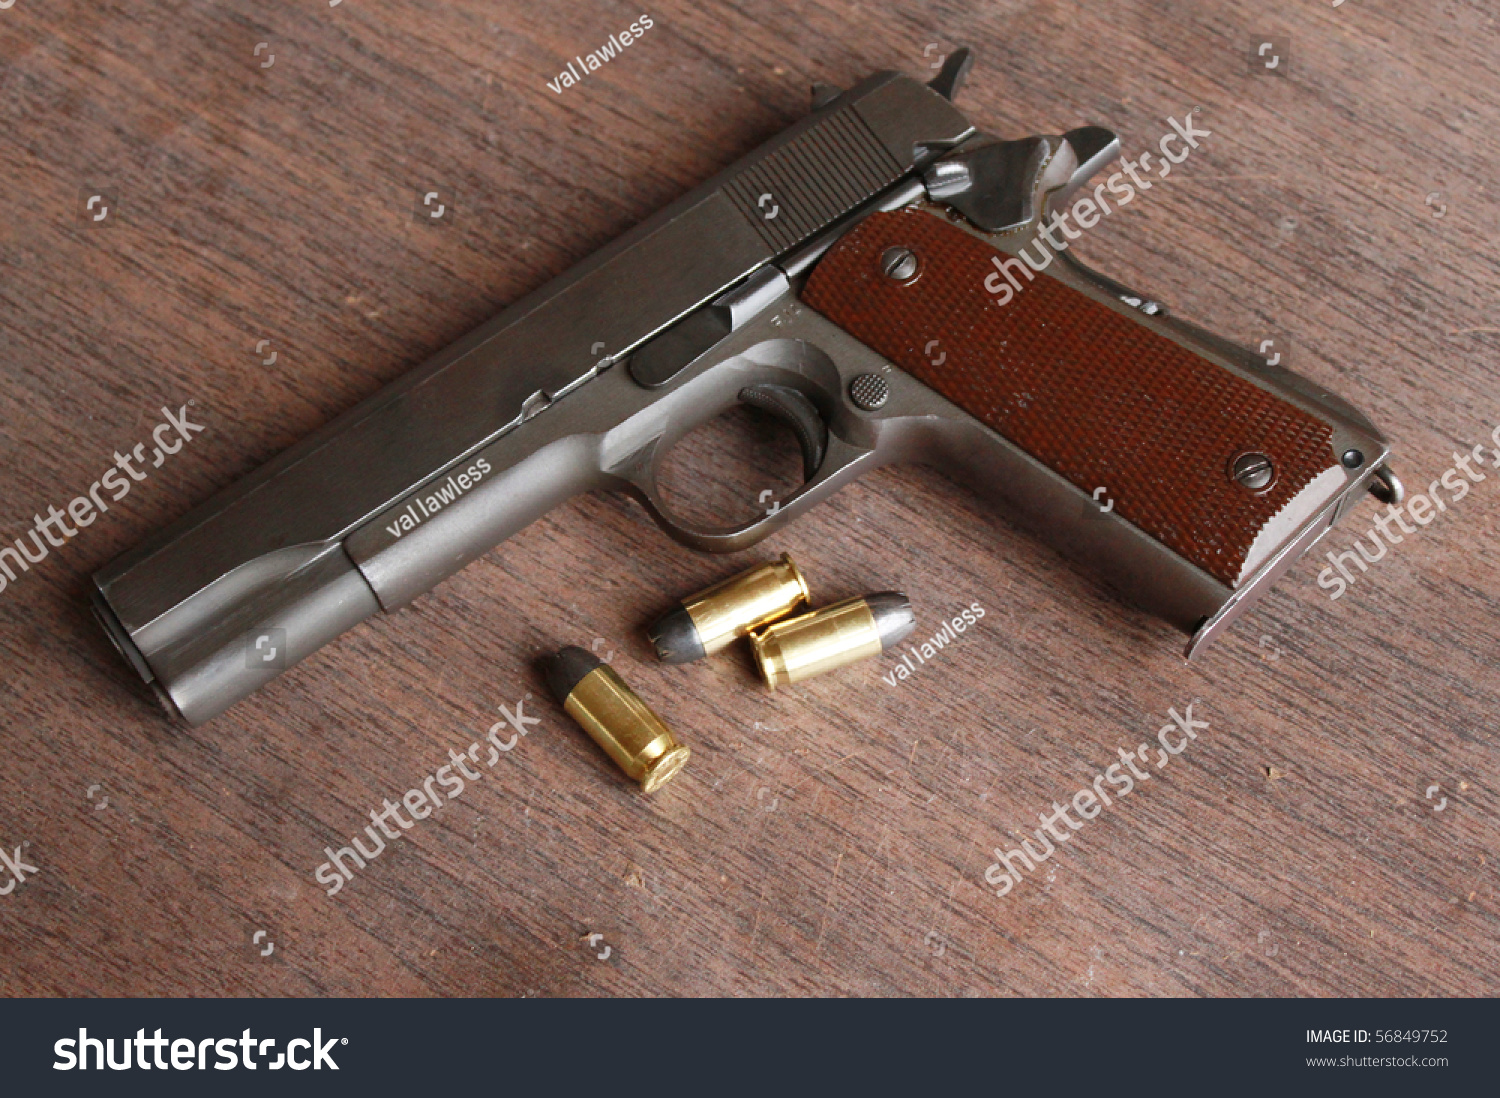 stock-photo-gun-and-bullets-on-a-table-56849752.jpg